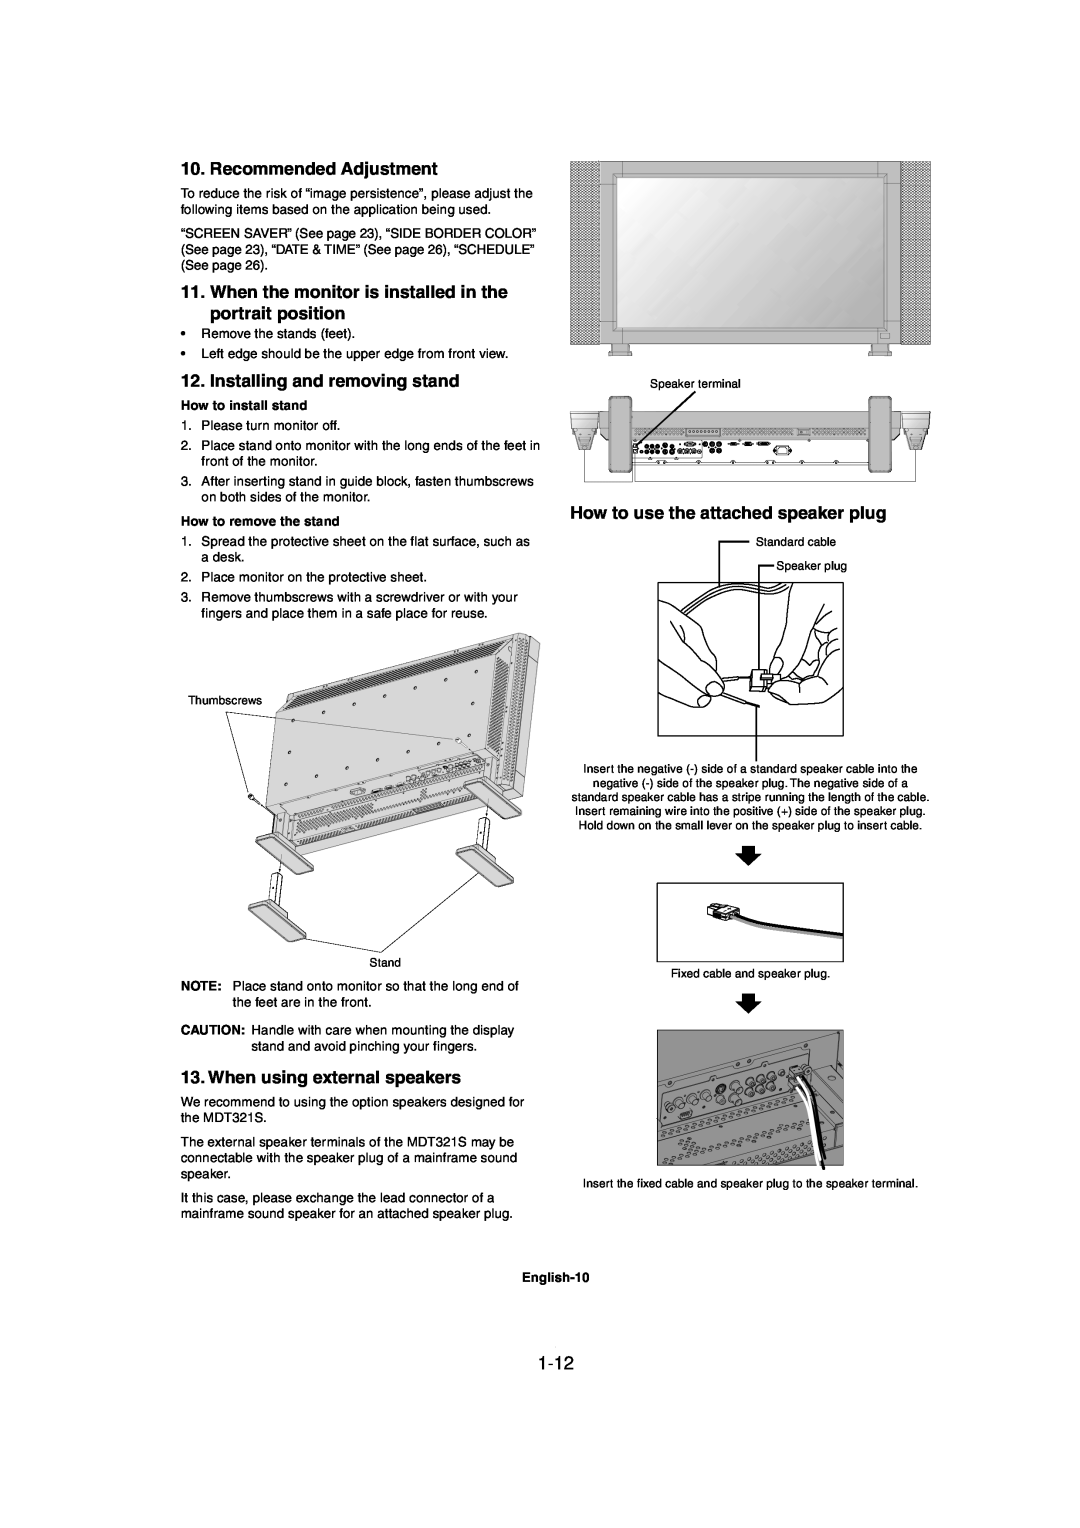 Mitsubishi Electronics MDT321S Recommended Adjustment, When the monitor is installed in the portrait position, 1-12 